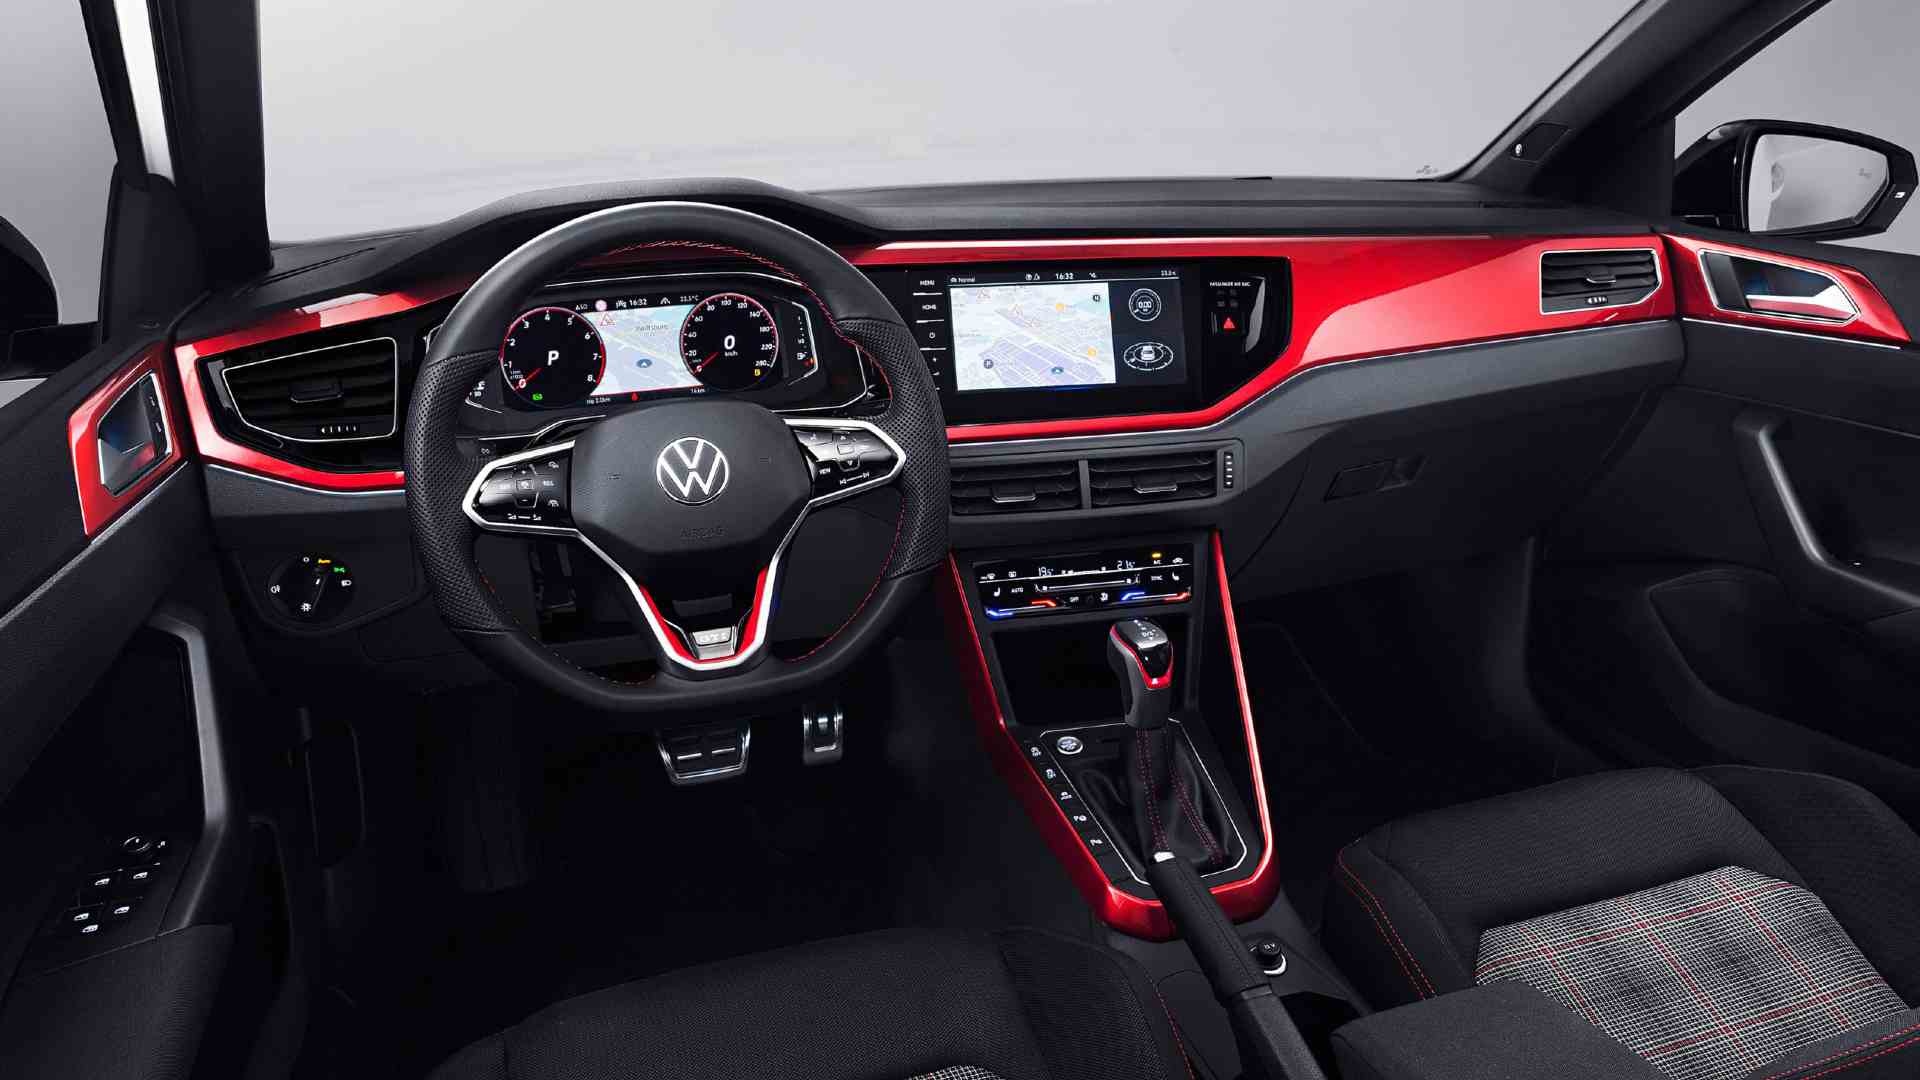 For 2022, the Volkswagen Polo GTI gets the 'Digital Cockpit' twin-screen setup. Image: Volkswagen